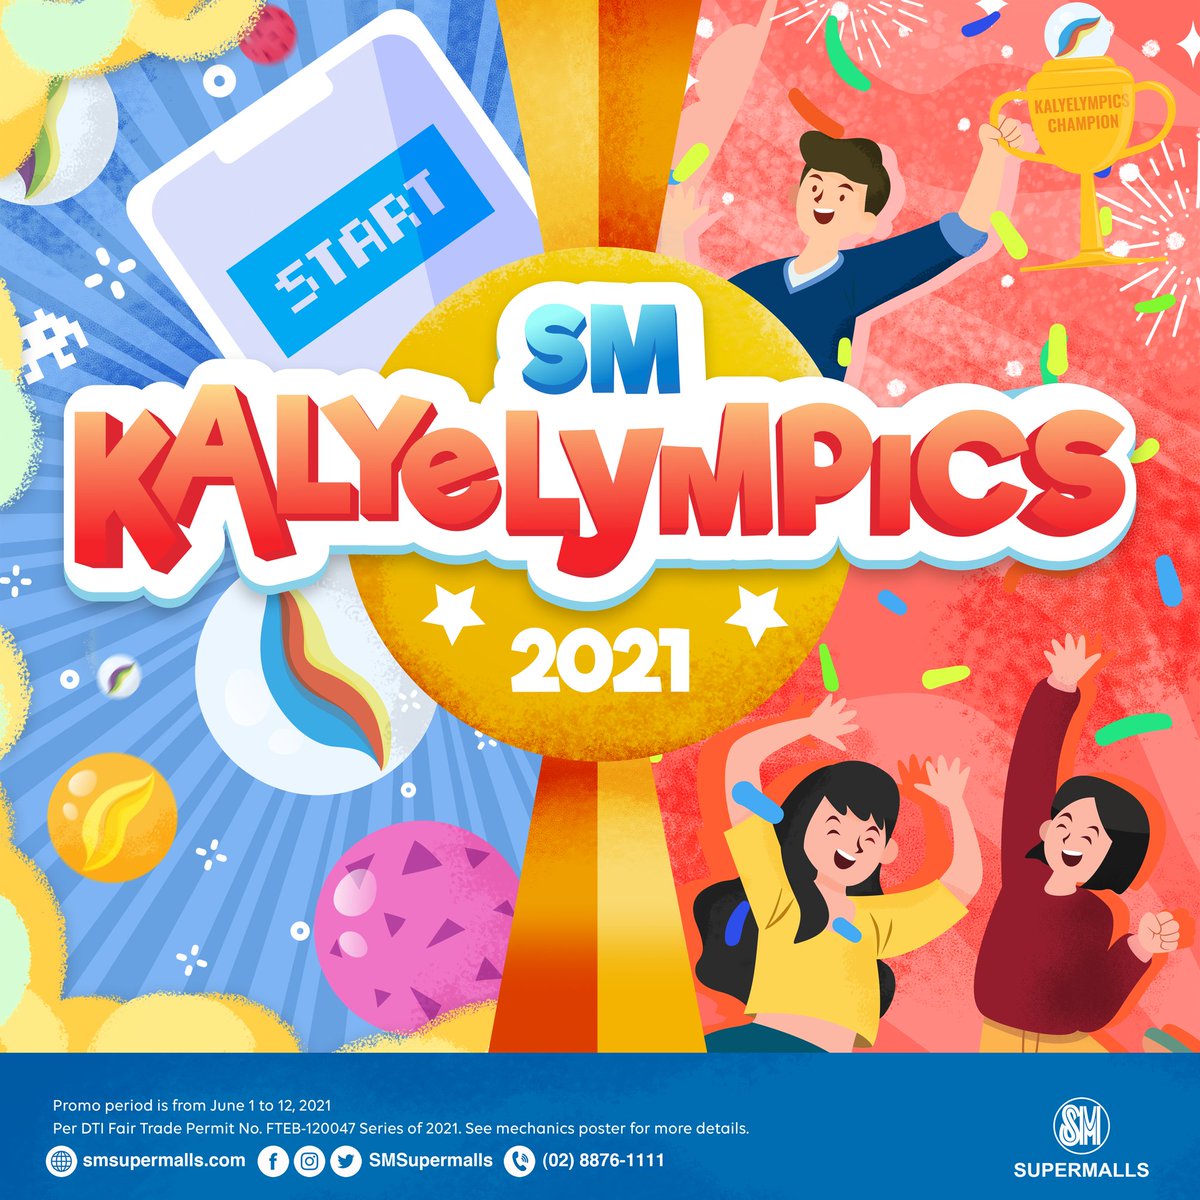 #SalutePinoyHeroesatSM and enjoy a classic Pinoy jolens game at SM Kalyelympics 2021! Just visit any participating SM malls, scan the QR code, and swipe to match at least three (3) jolens for a chance to win exciting prizes! Visit gosm.link/SMKalyelympics… for the full mechanics.